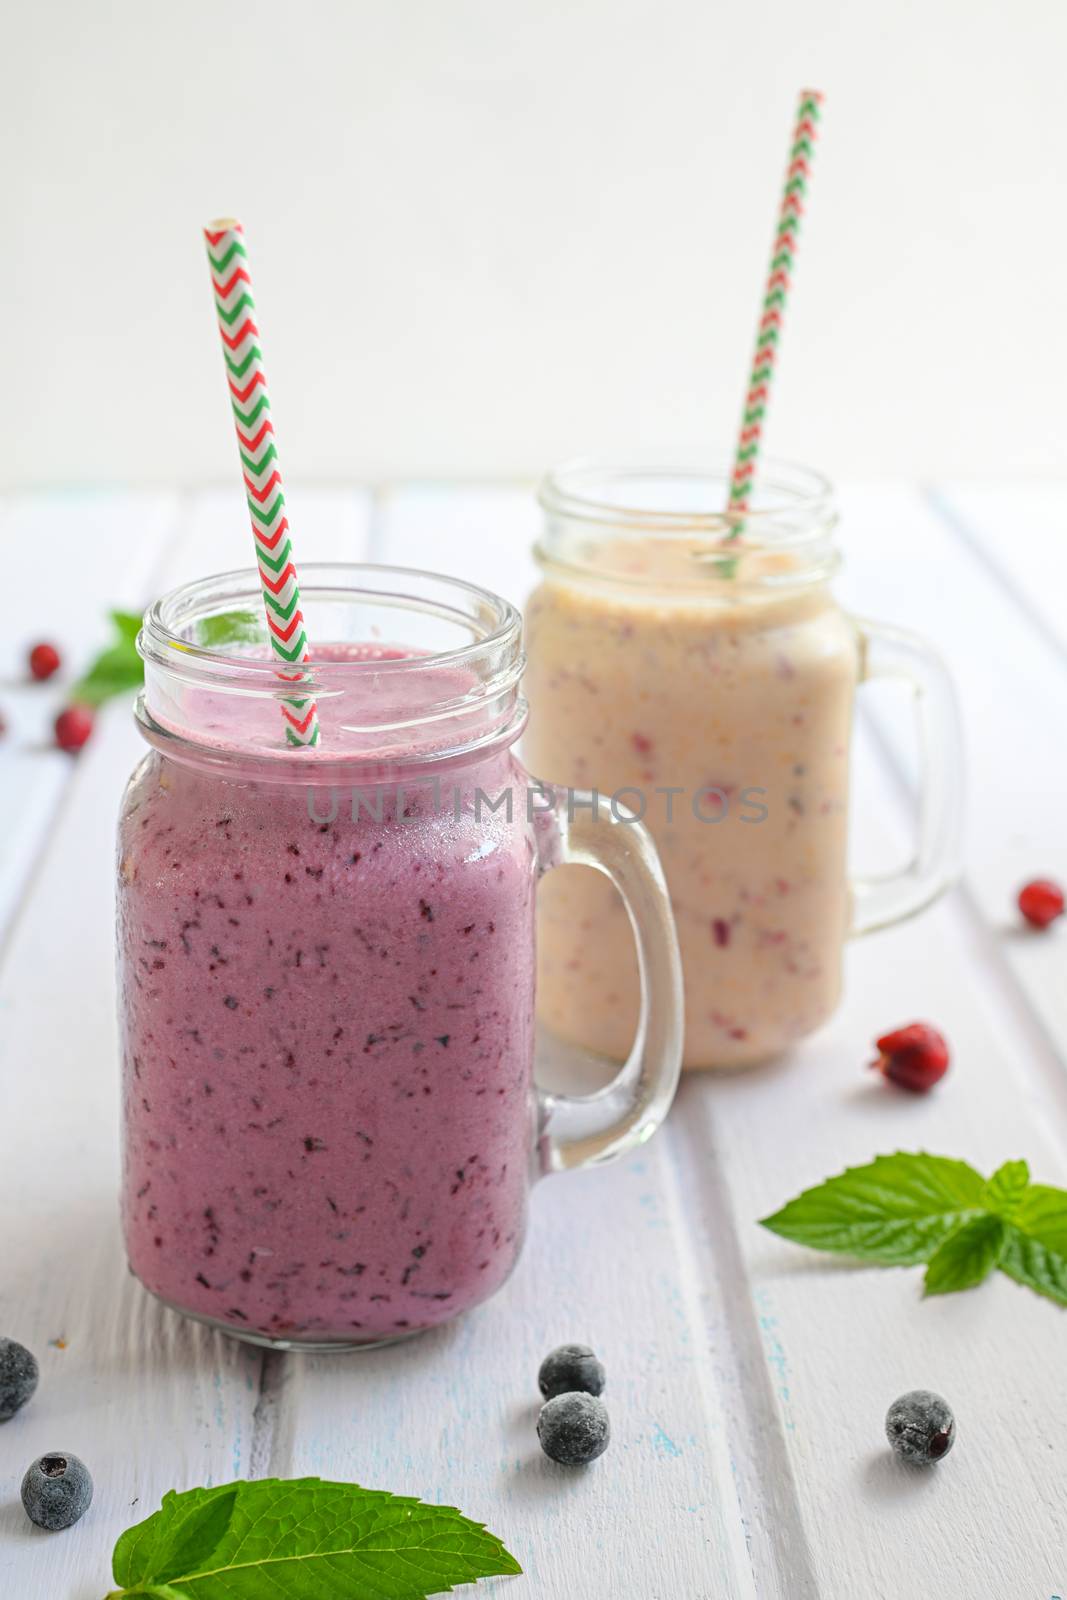 Blueberry smoothie with mint in mason jar with straw against a wood background.